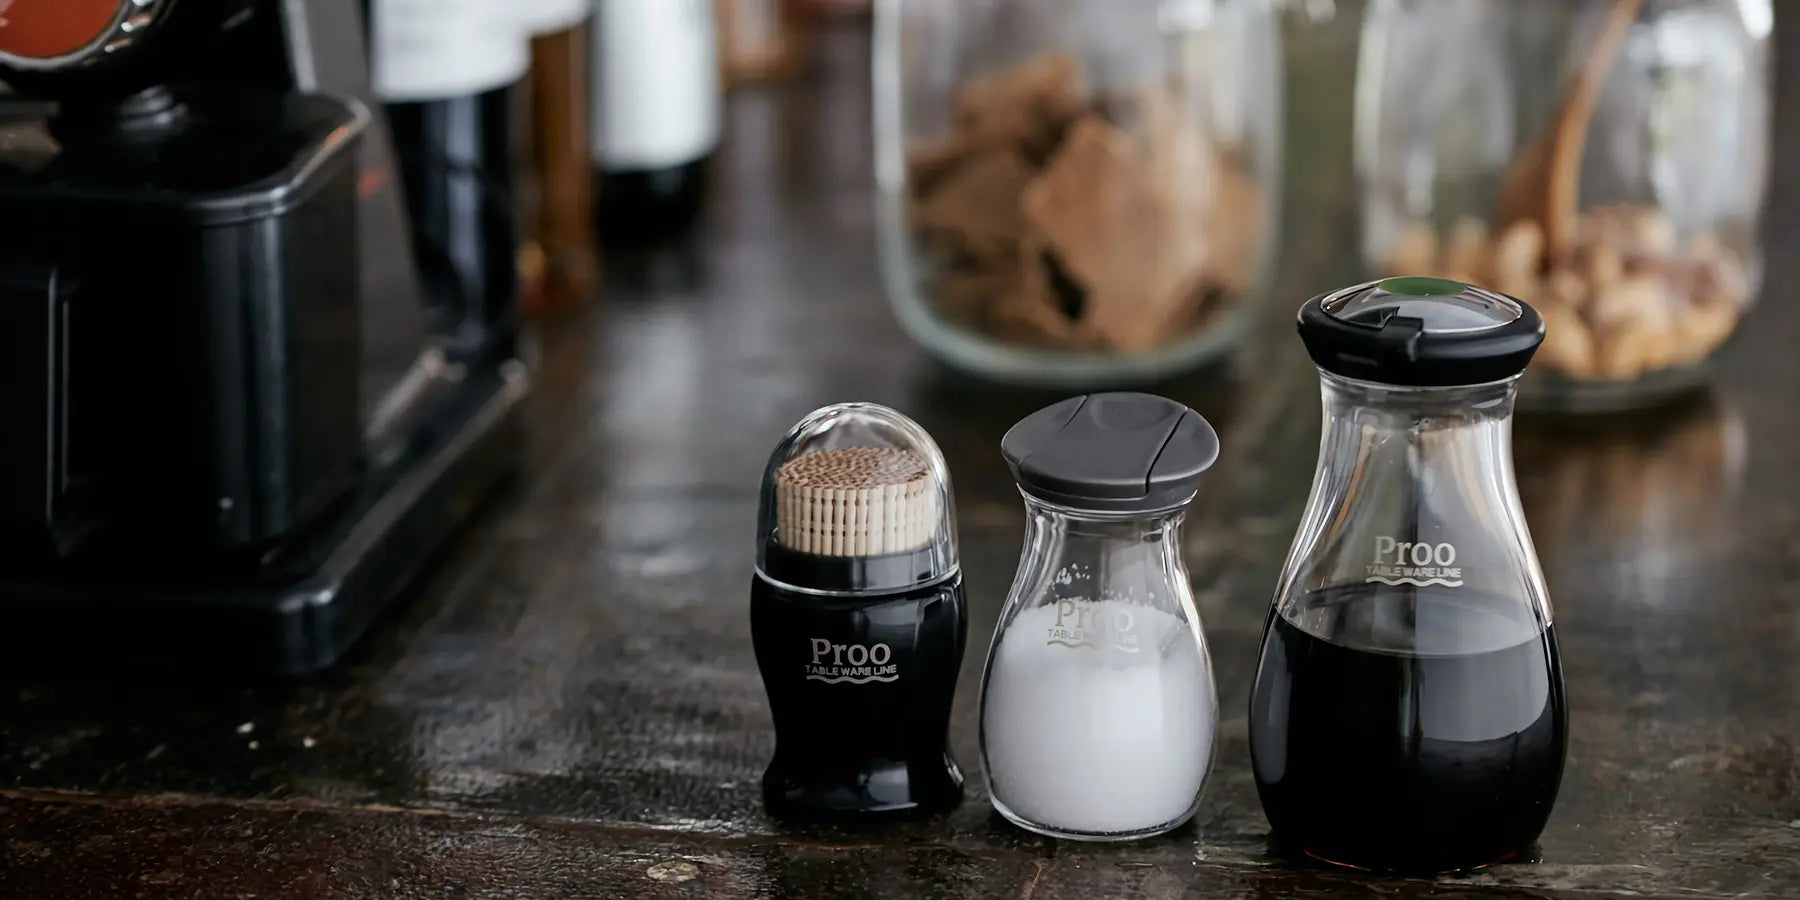 Discover our great selection of Salt & Pepper Shakers at Globalkitchen Japan.